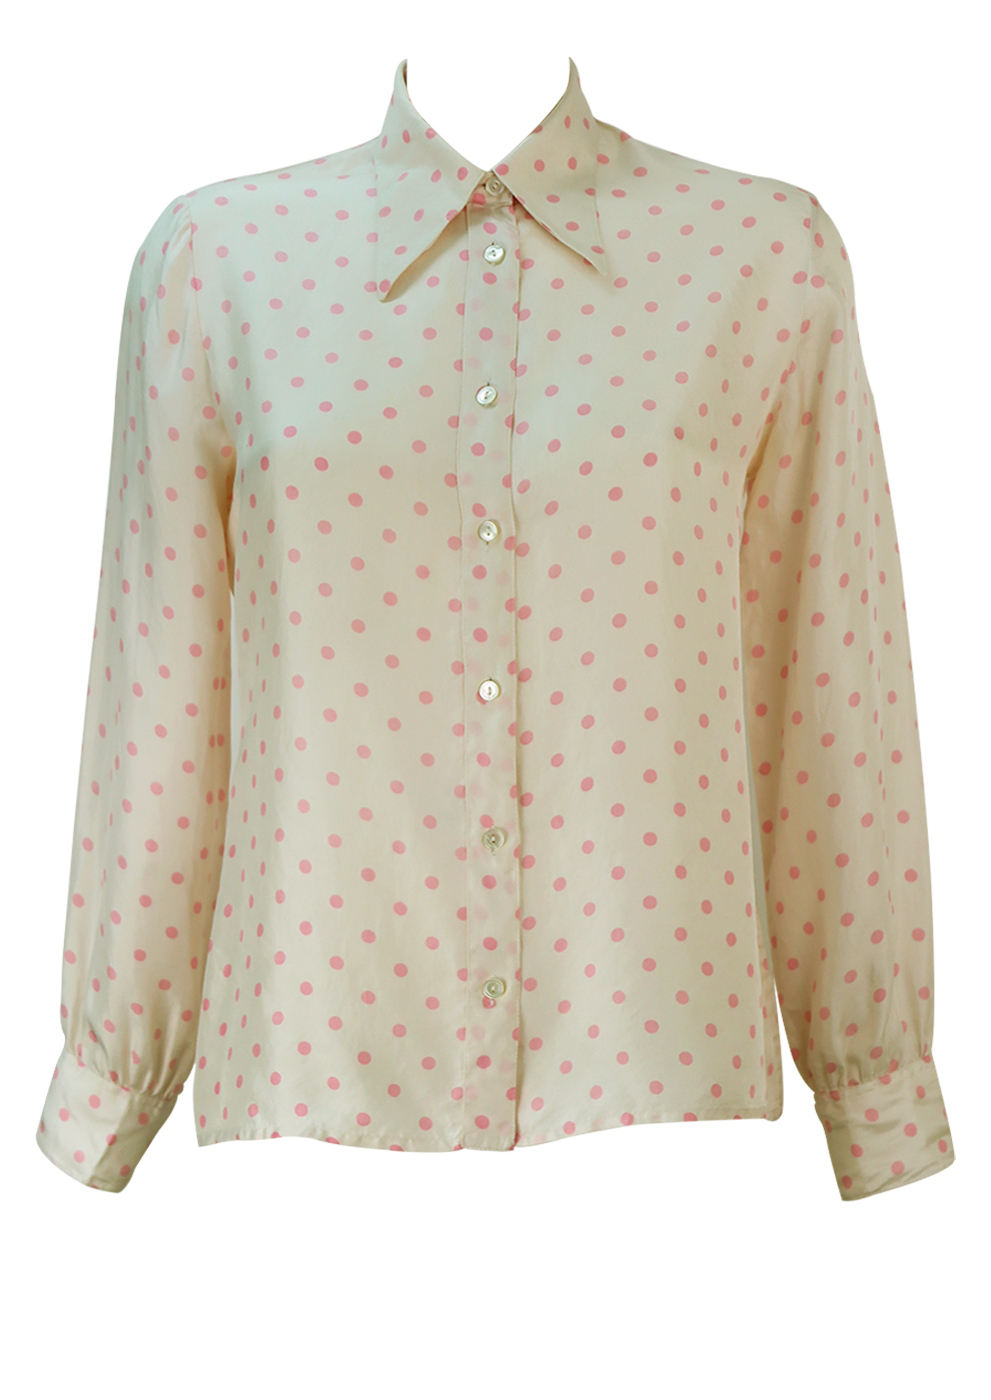 Vintage 60’s White Silk Blouse with Light Pink Polka Dots – M | Reign ...